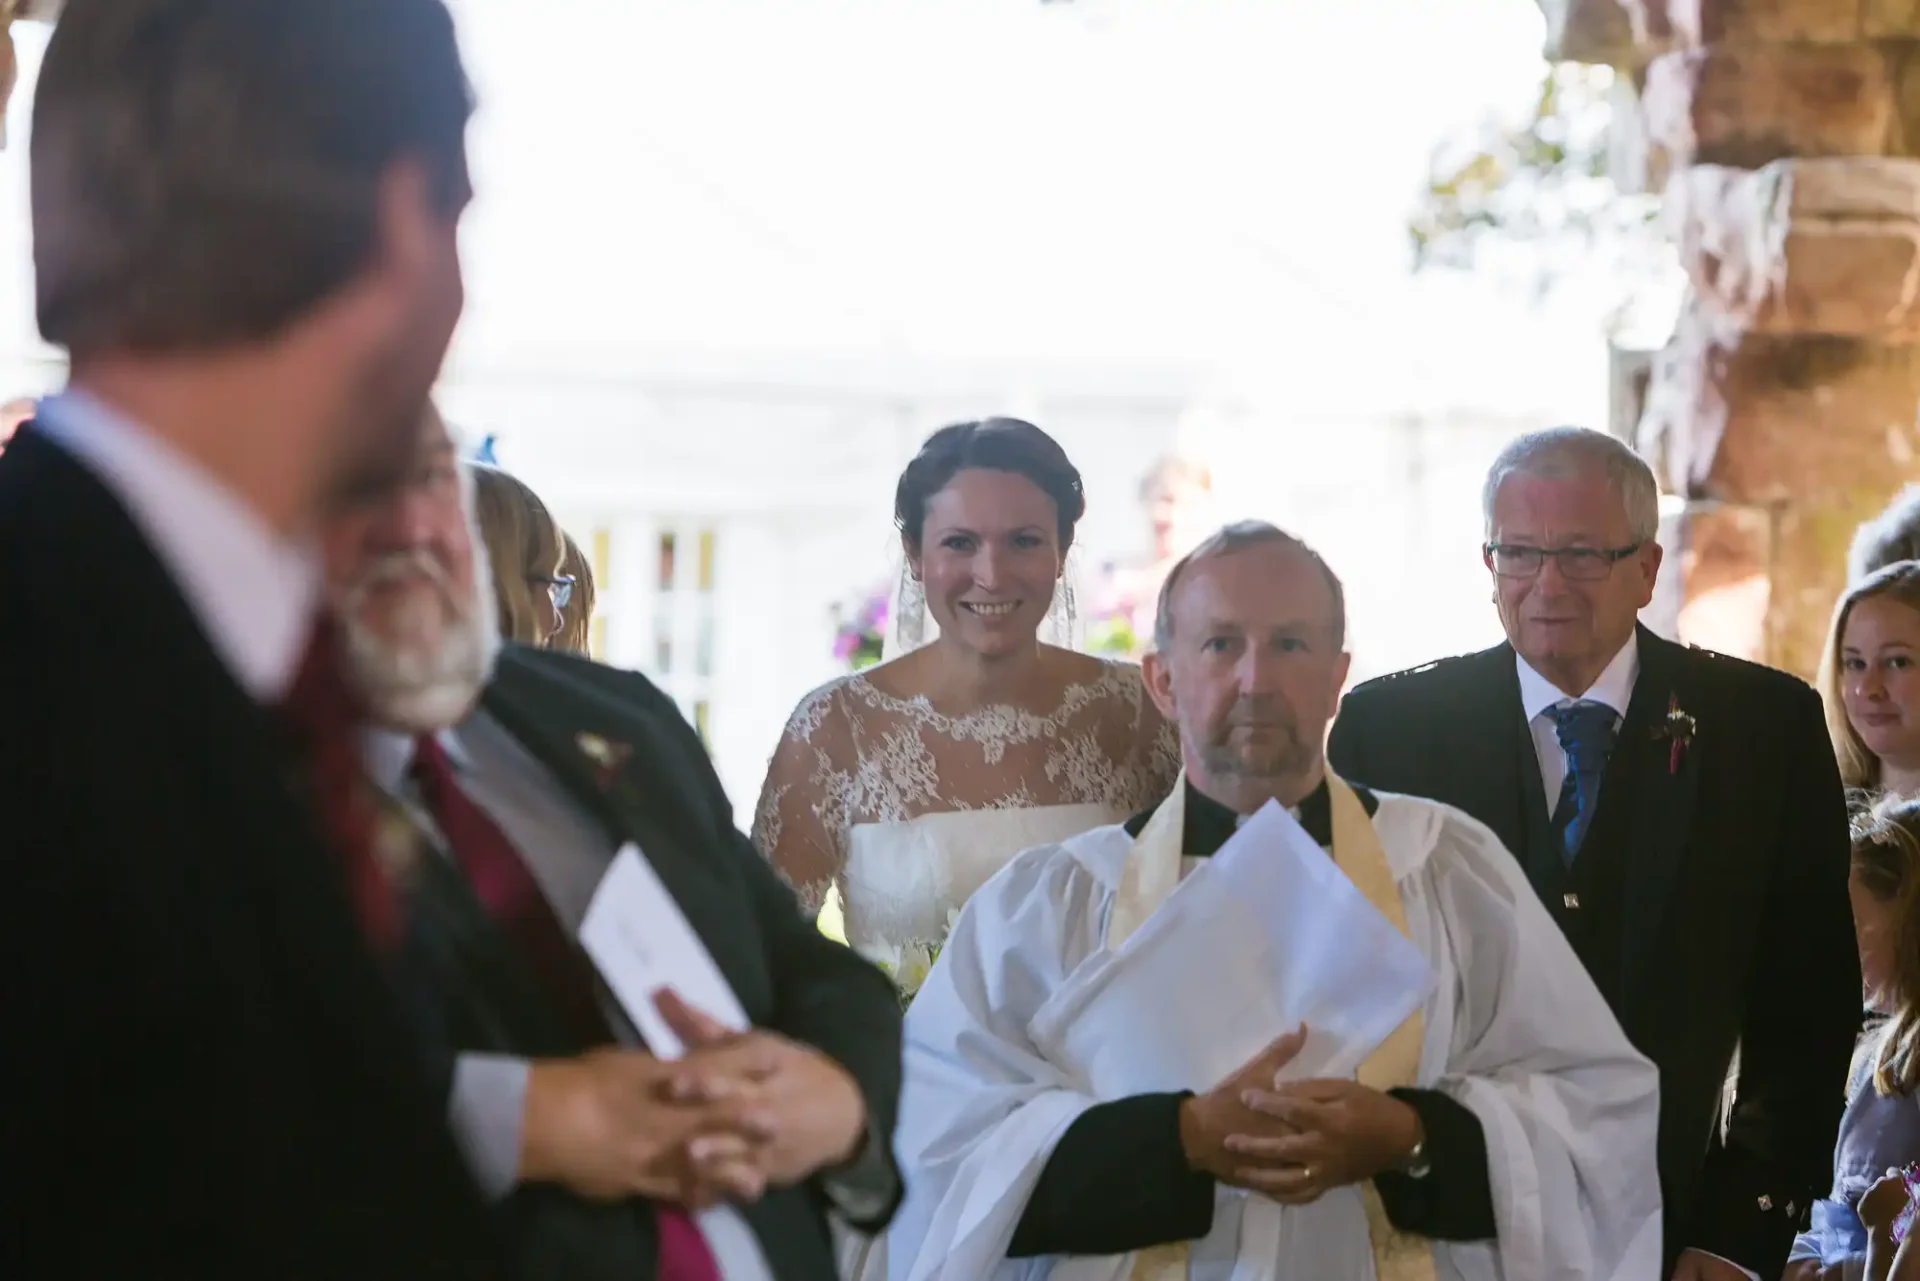 A bride walks down the aisle, smiling, accompanied by an older man; a priest and guests are in the foreground.